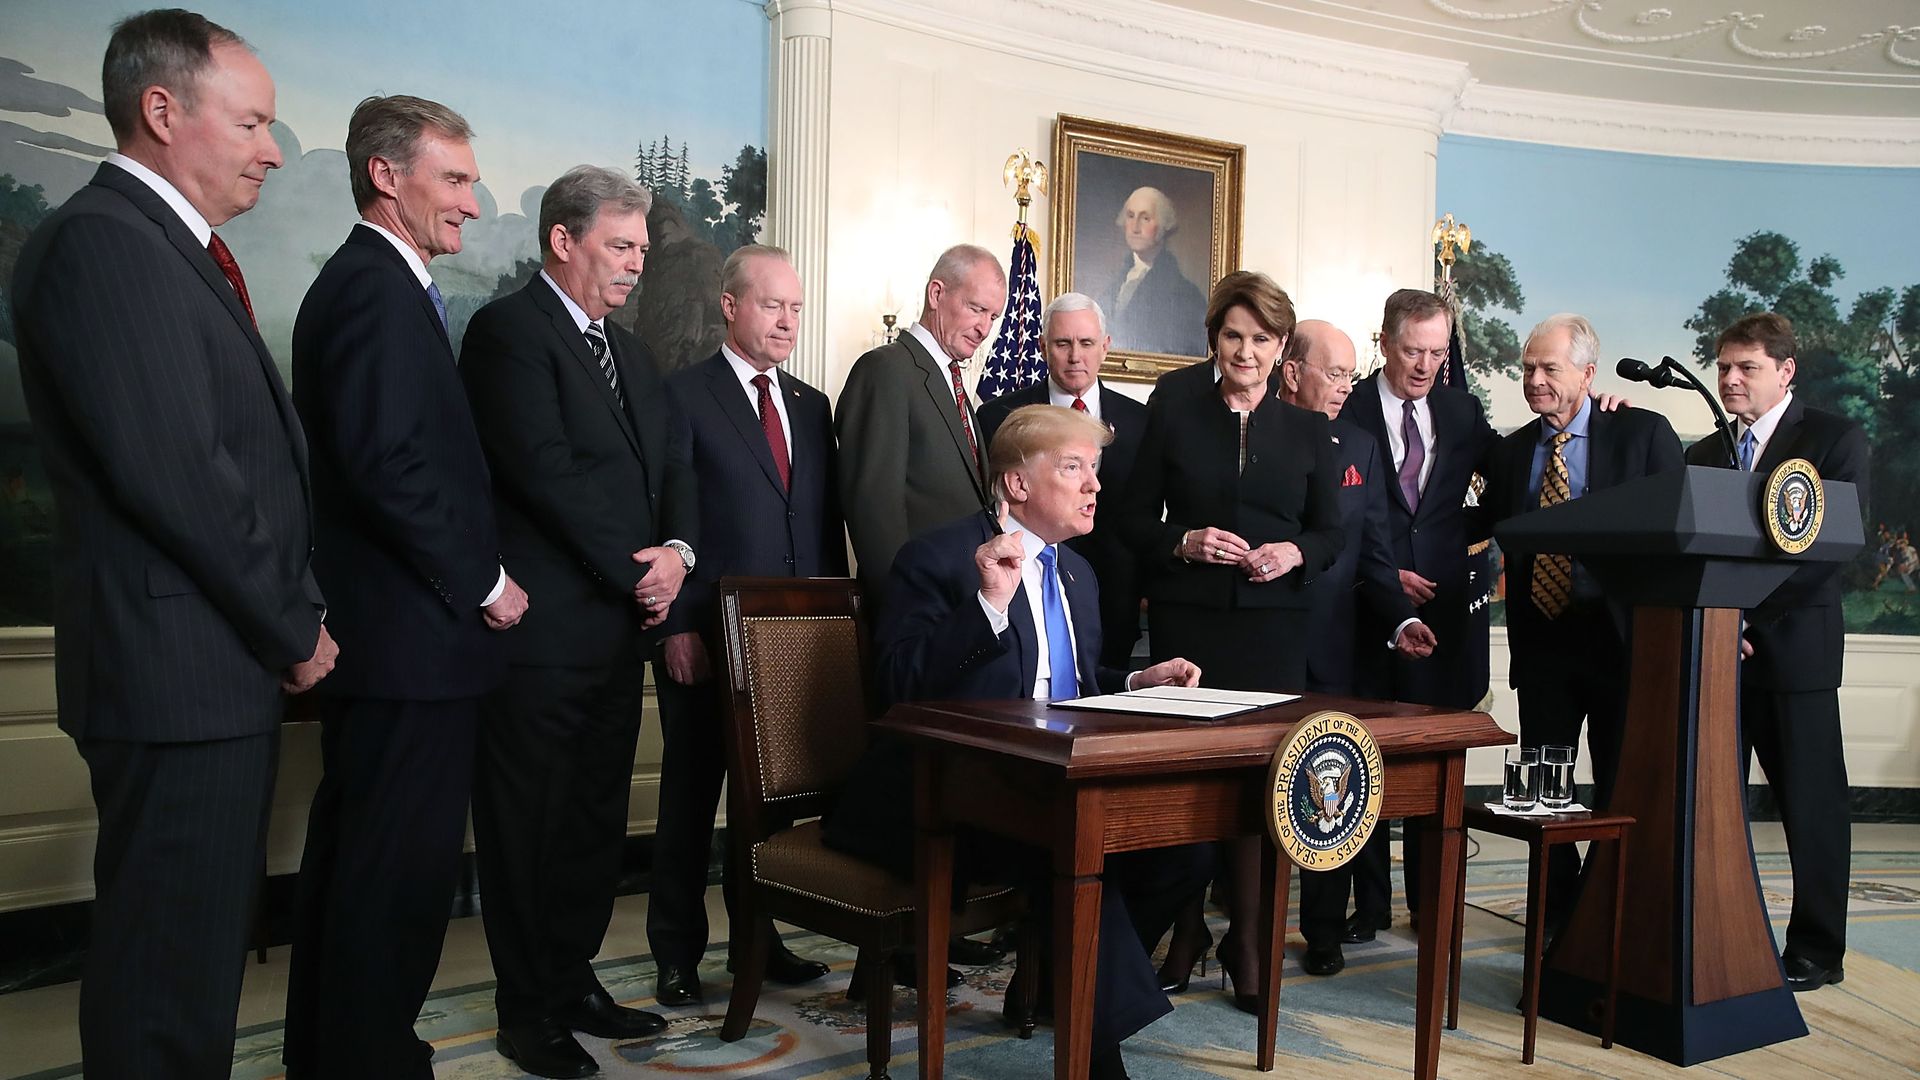 President Trump flanked by members of the business community as he signs a memorandum aimed at what he calls Chinese economic aggression in the Roosevelt Room at the White House on March 22, 2018.